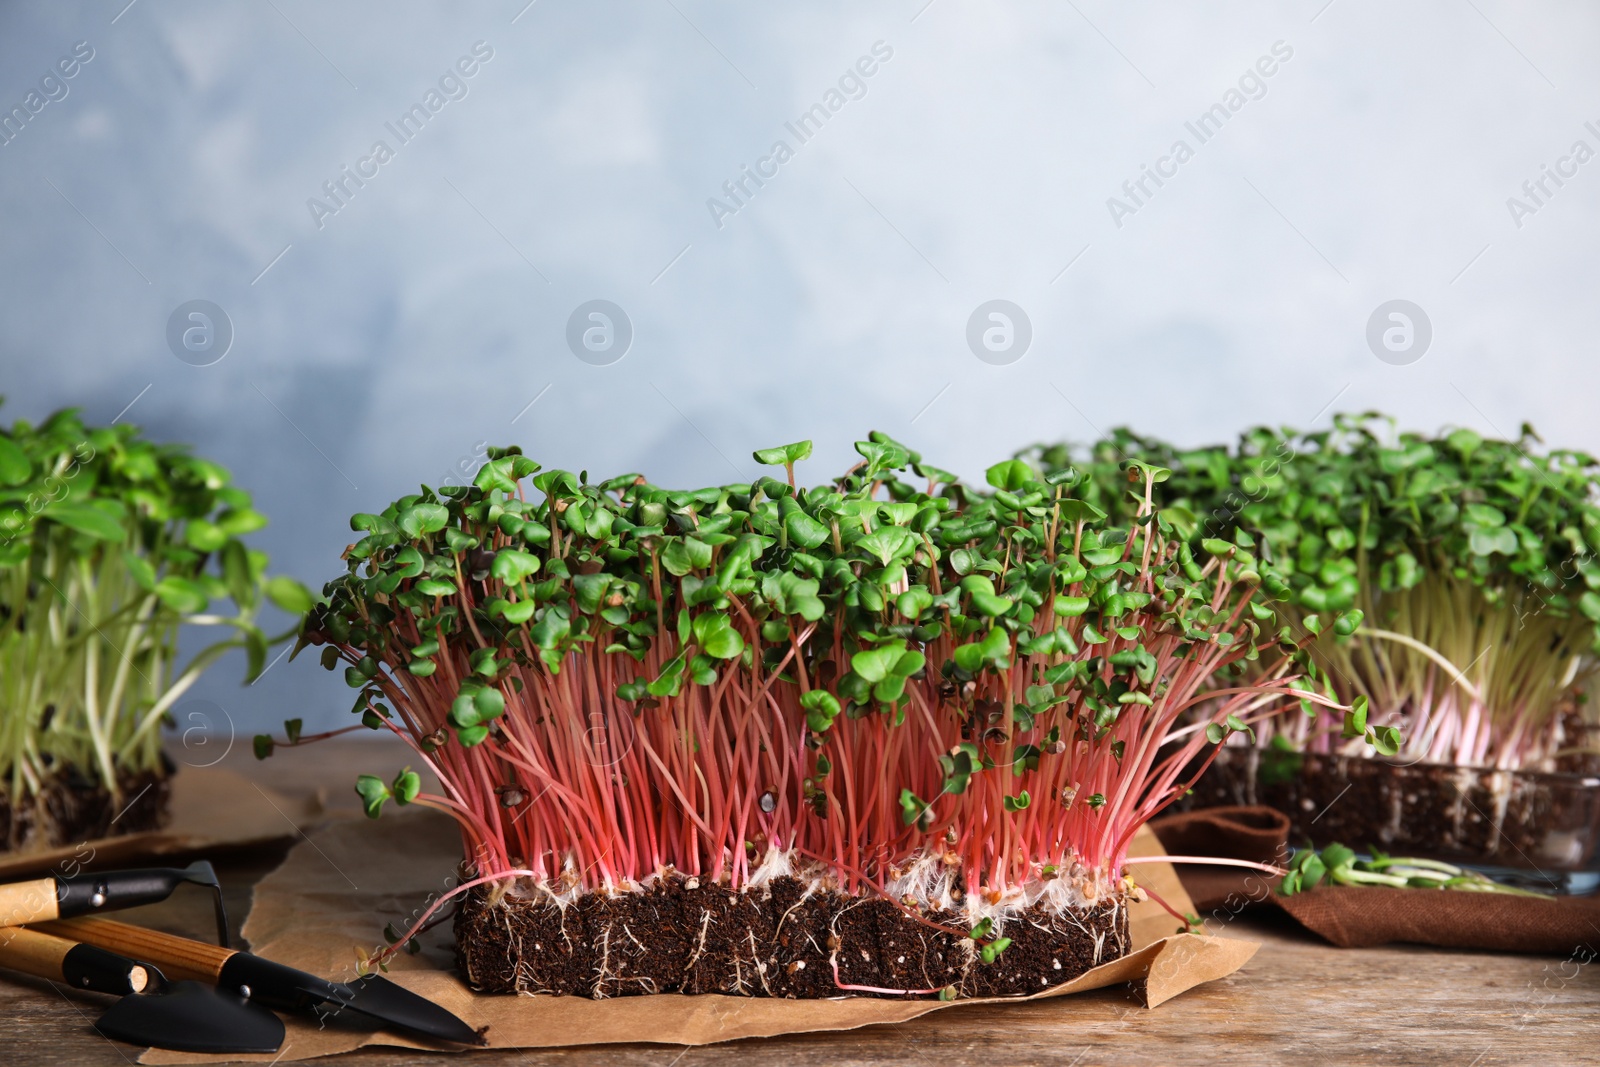 Photo of Fresh organic microgreens and gardening tools on wooden table